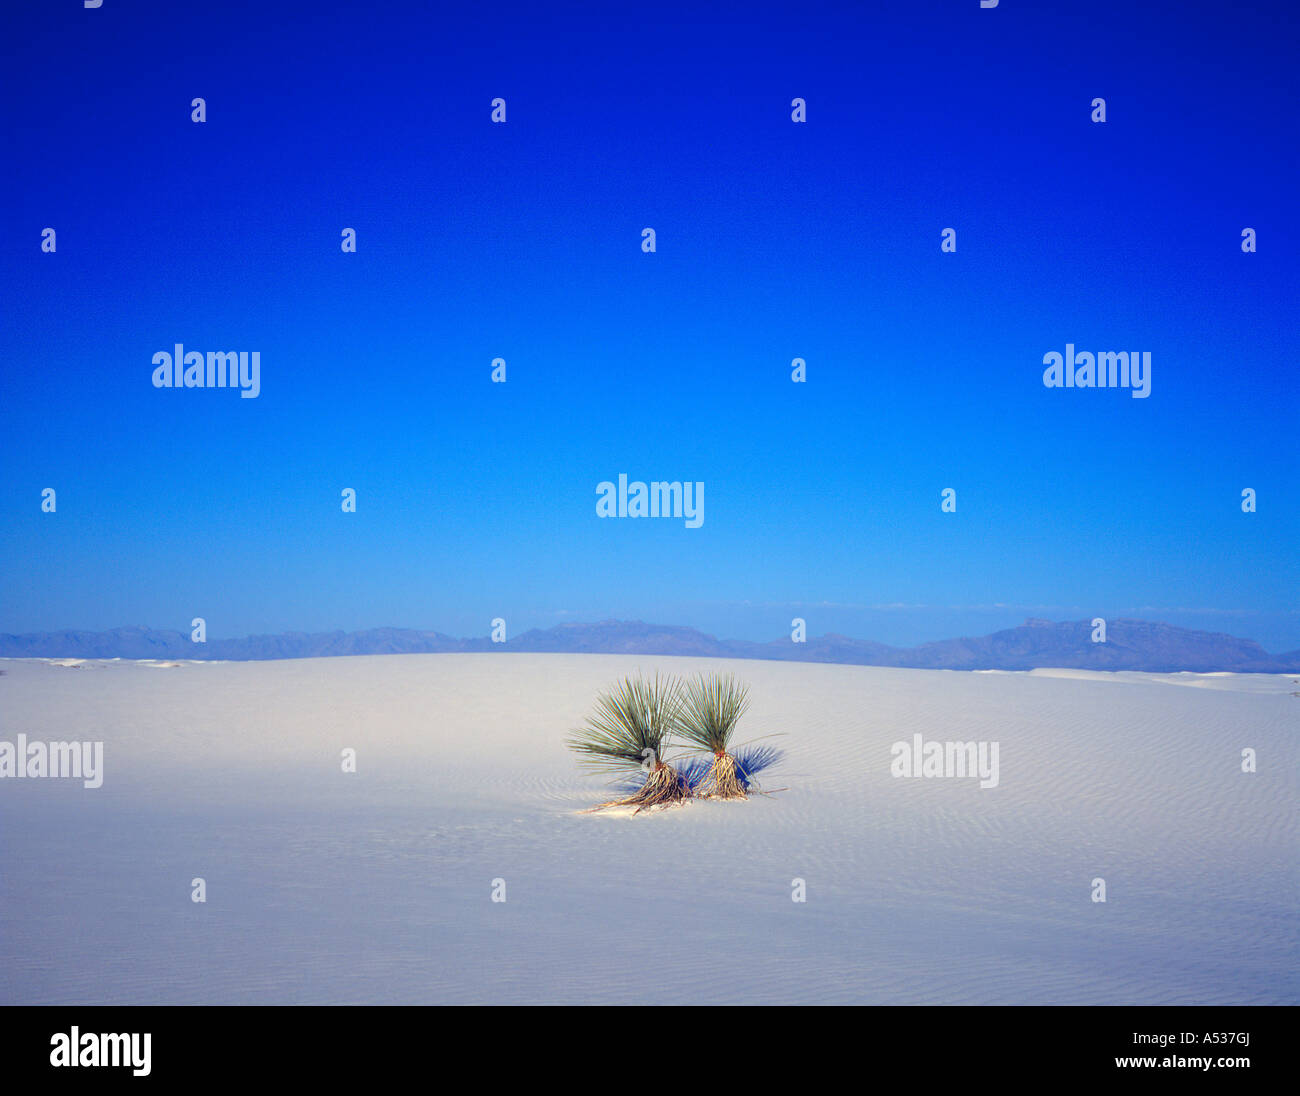 single Yucca plant in  White Sands National Monument New Mexico United States. Photo by Willy Matheisl Stock Photo